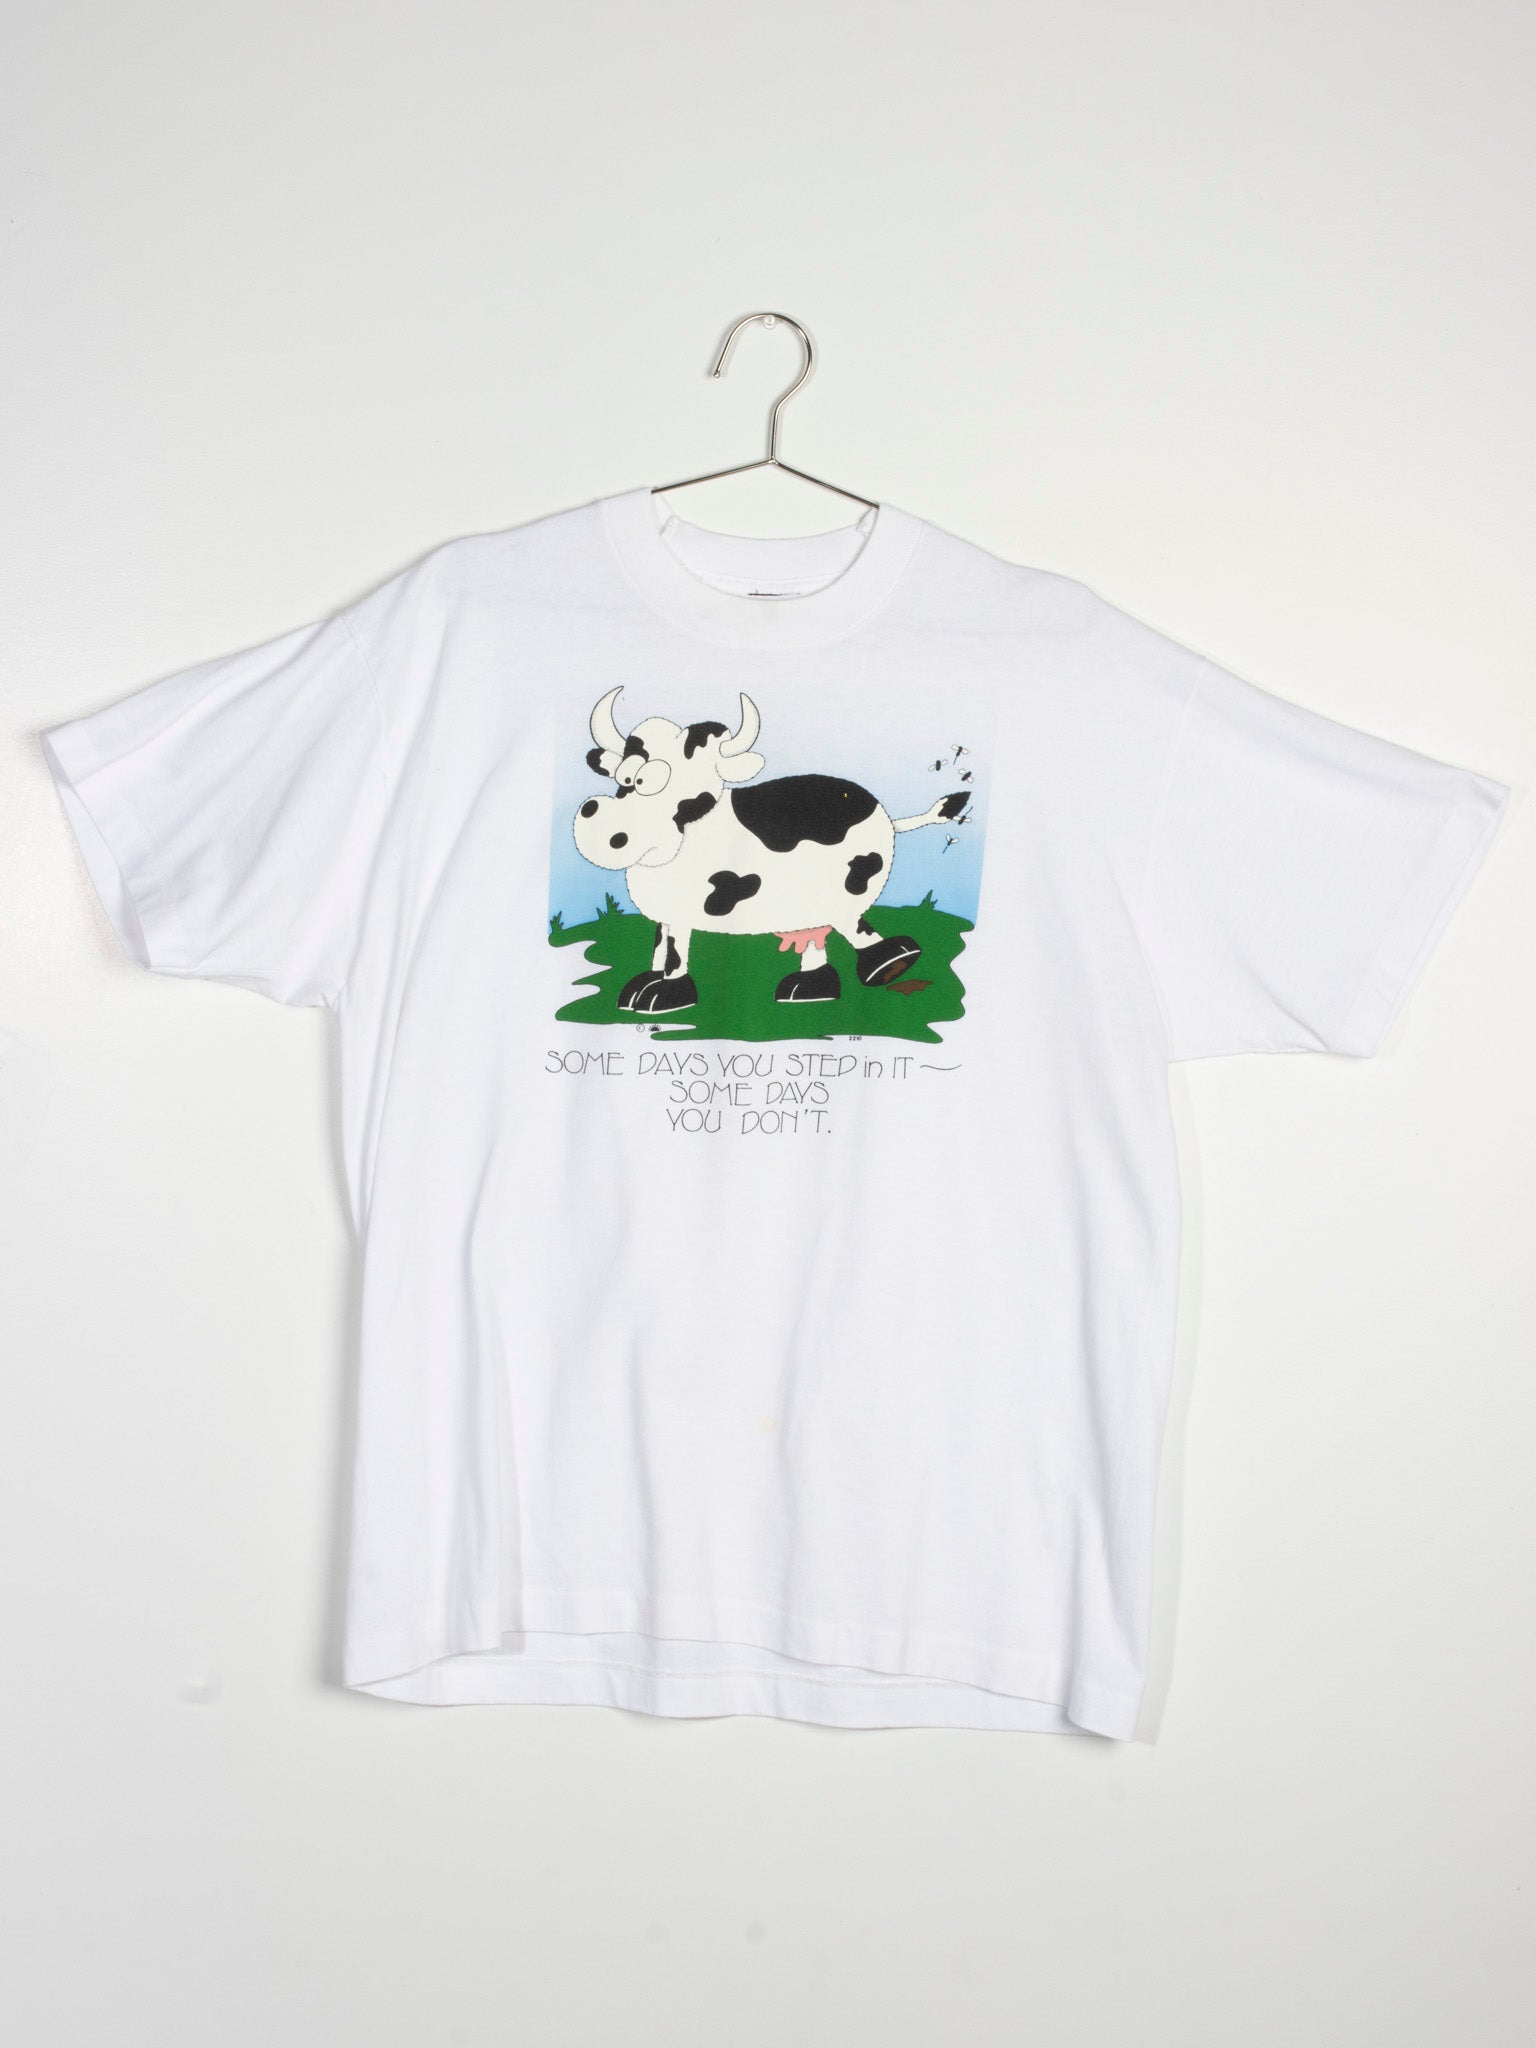 "Some Days You Step In It" Cow Tee (1X)